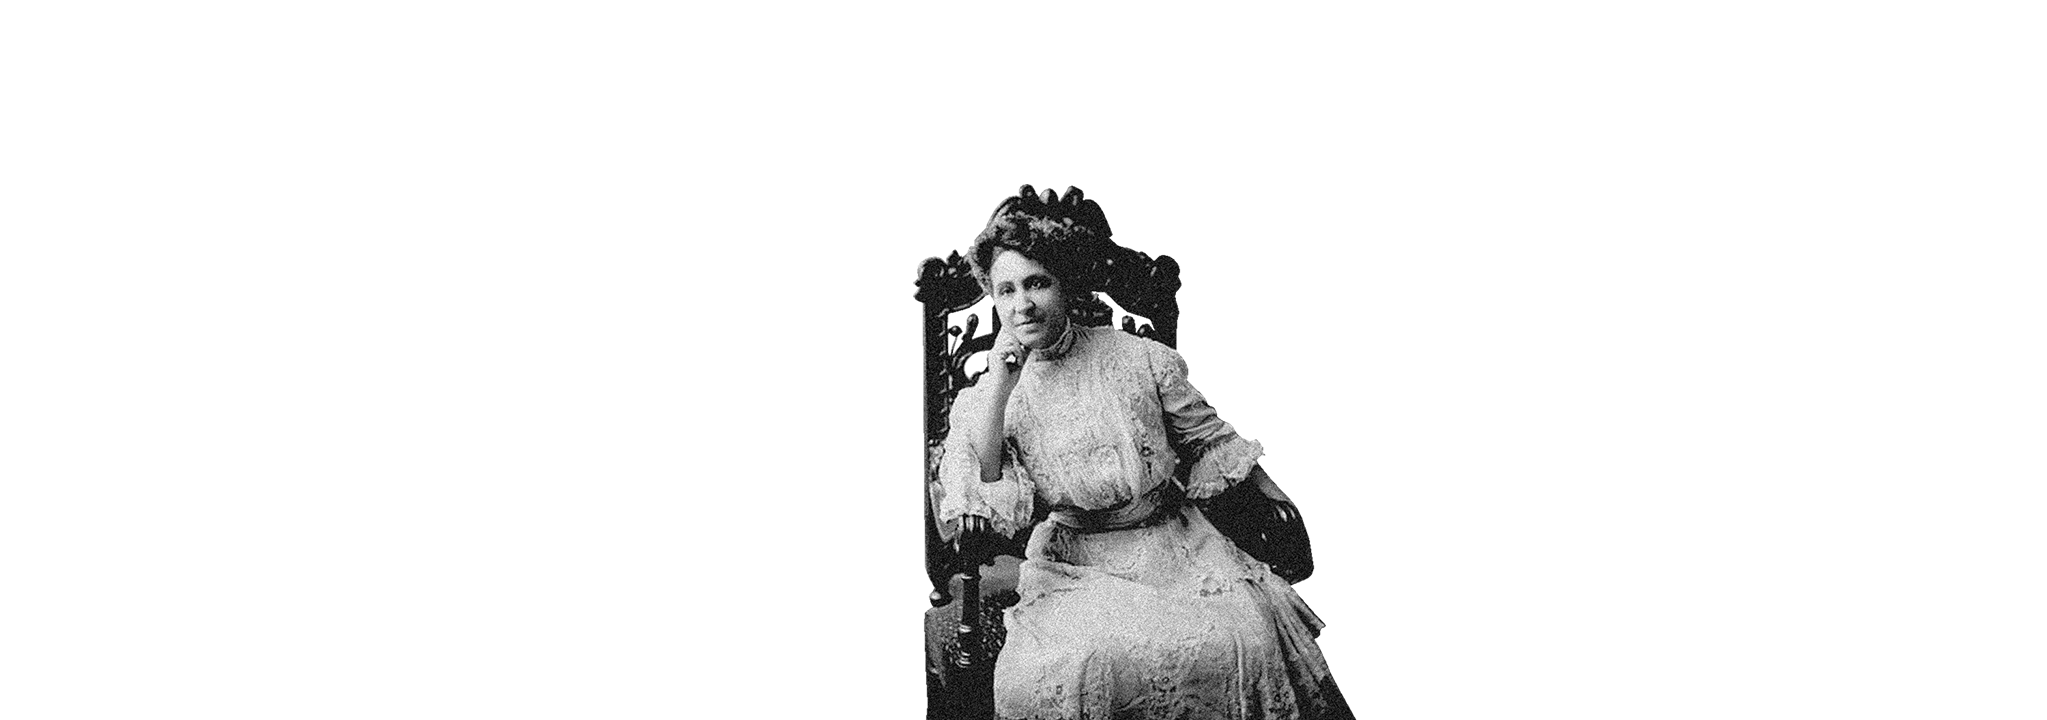 A black-and-white photo of Mary Church Terrell sitting